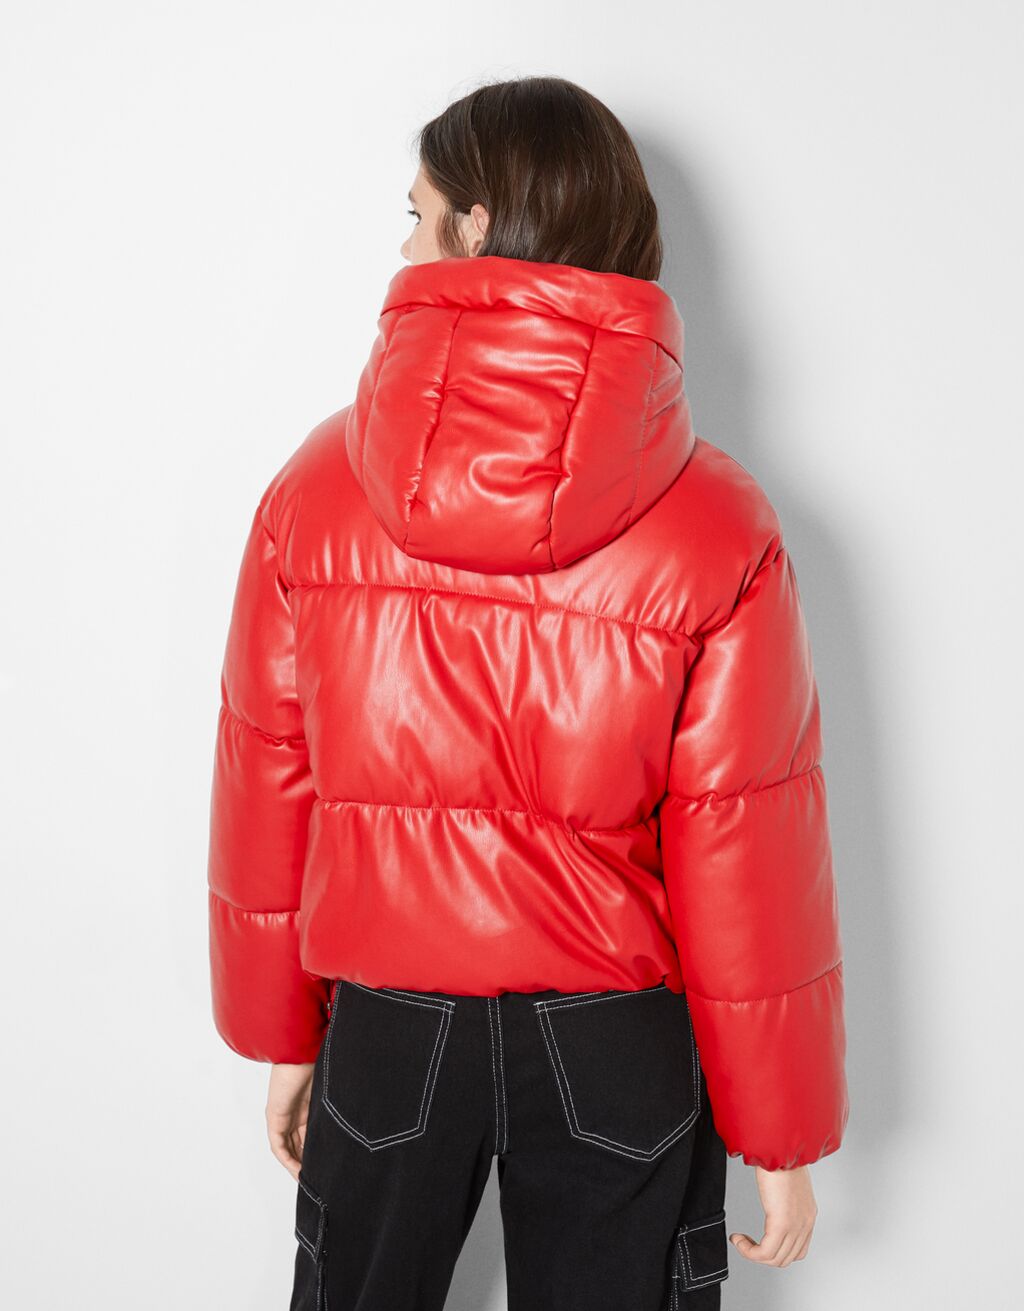 Faux leather puffer jacket with hood